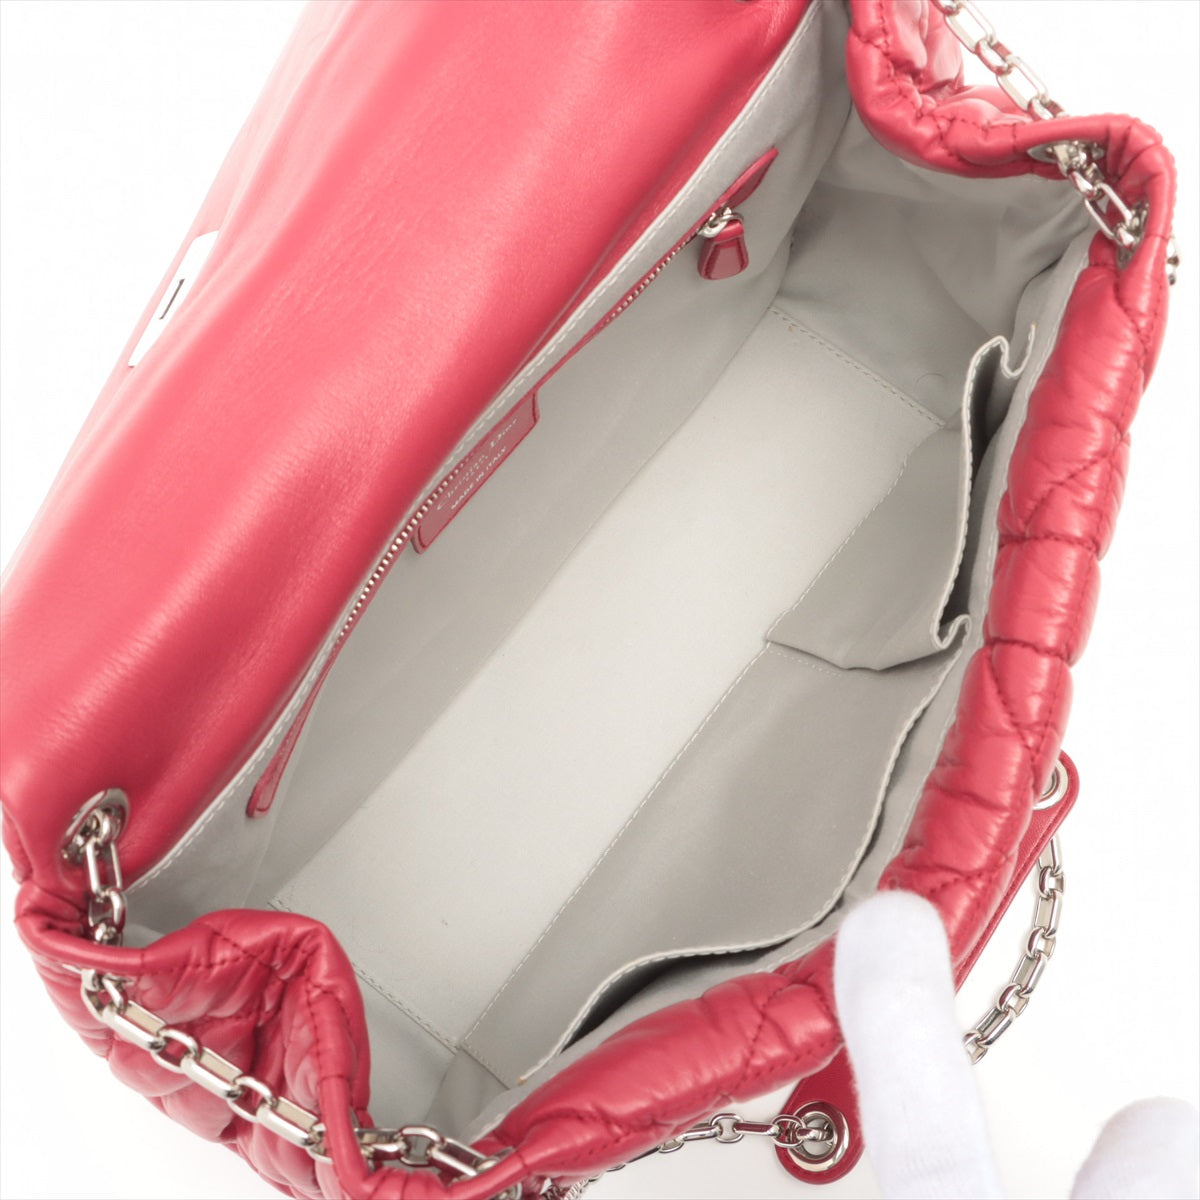 Christian Dior Leather Chain Shoulder Bag Red